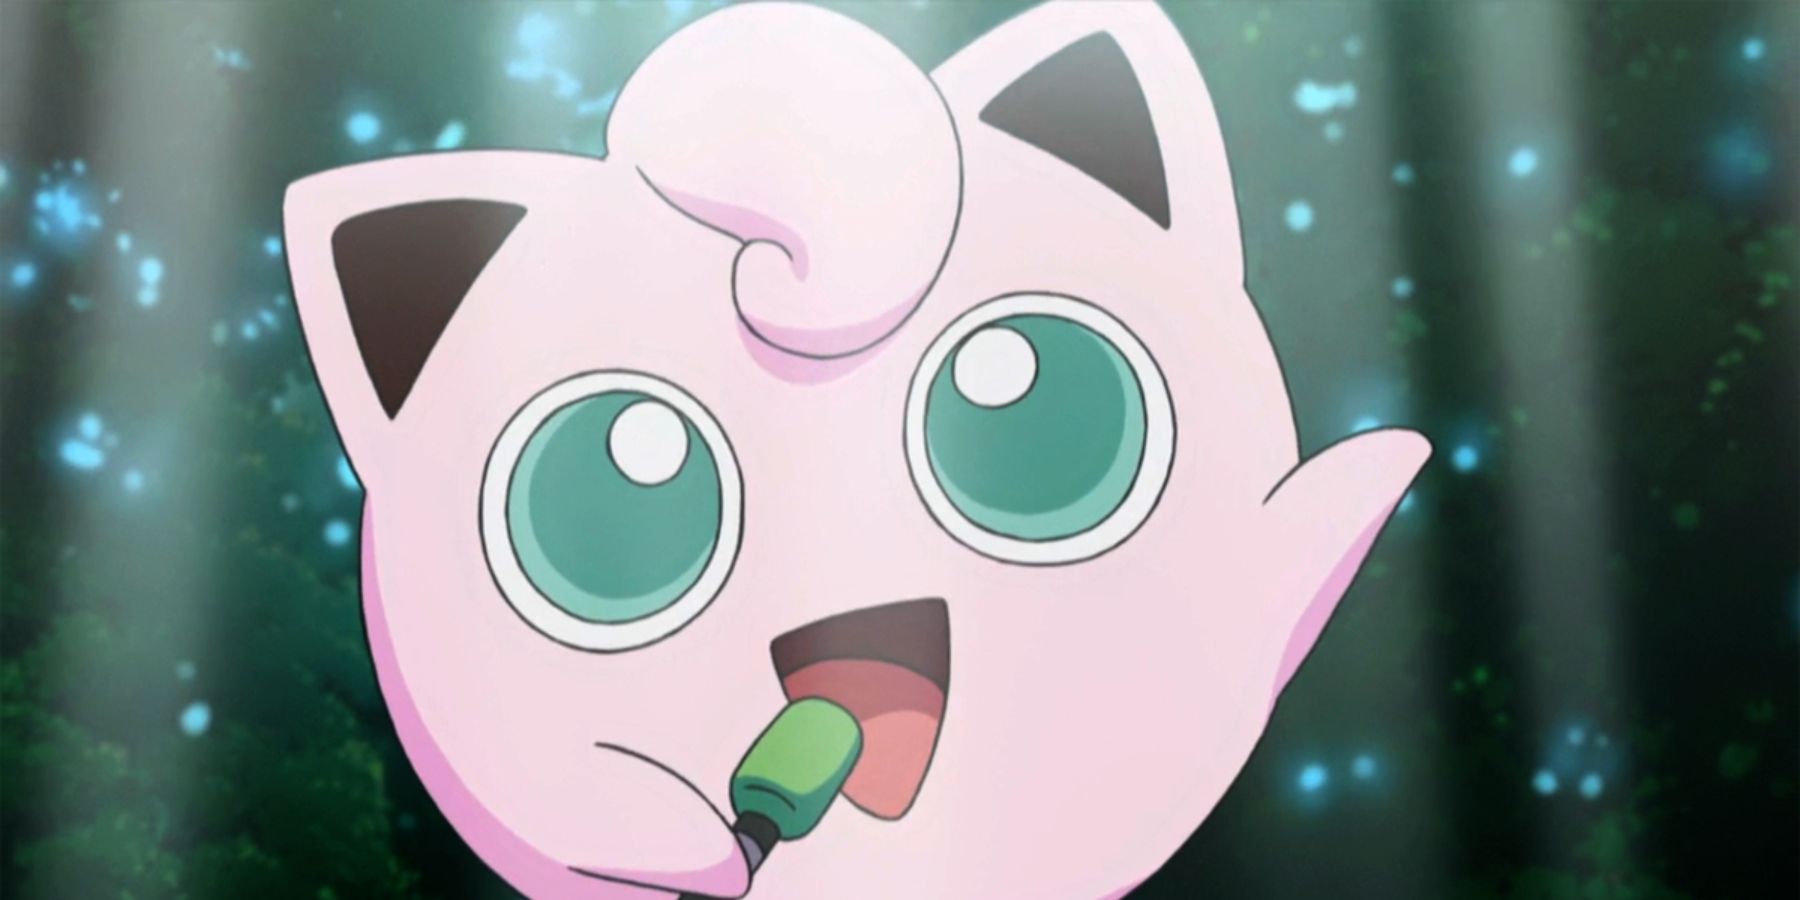 Jigglypuff using a marker as a microphone and singing in the Pokémon anime